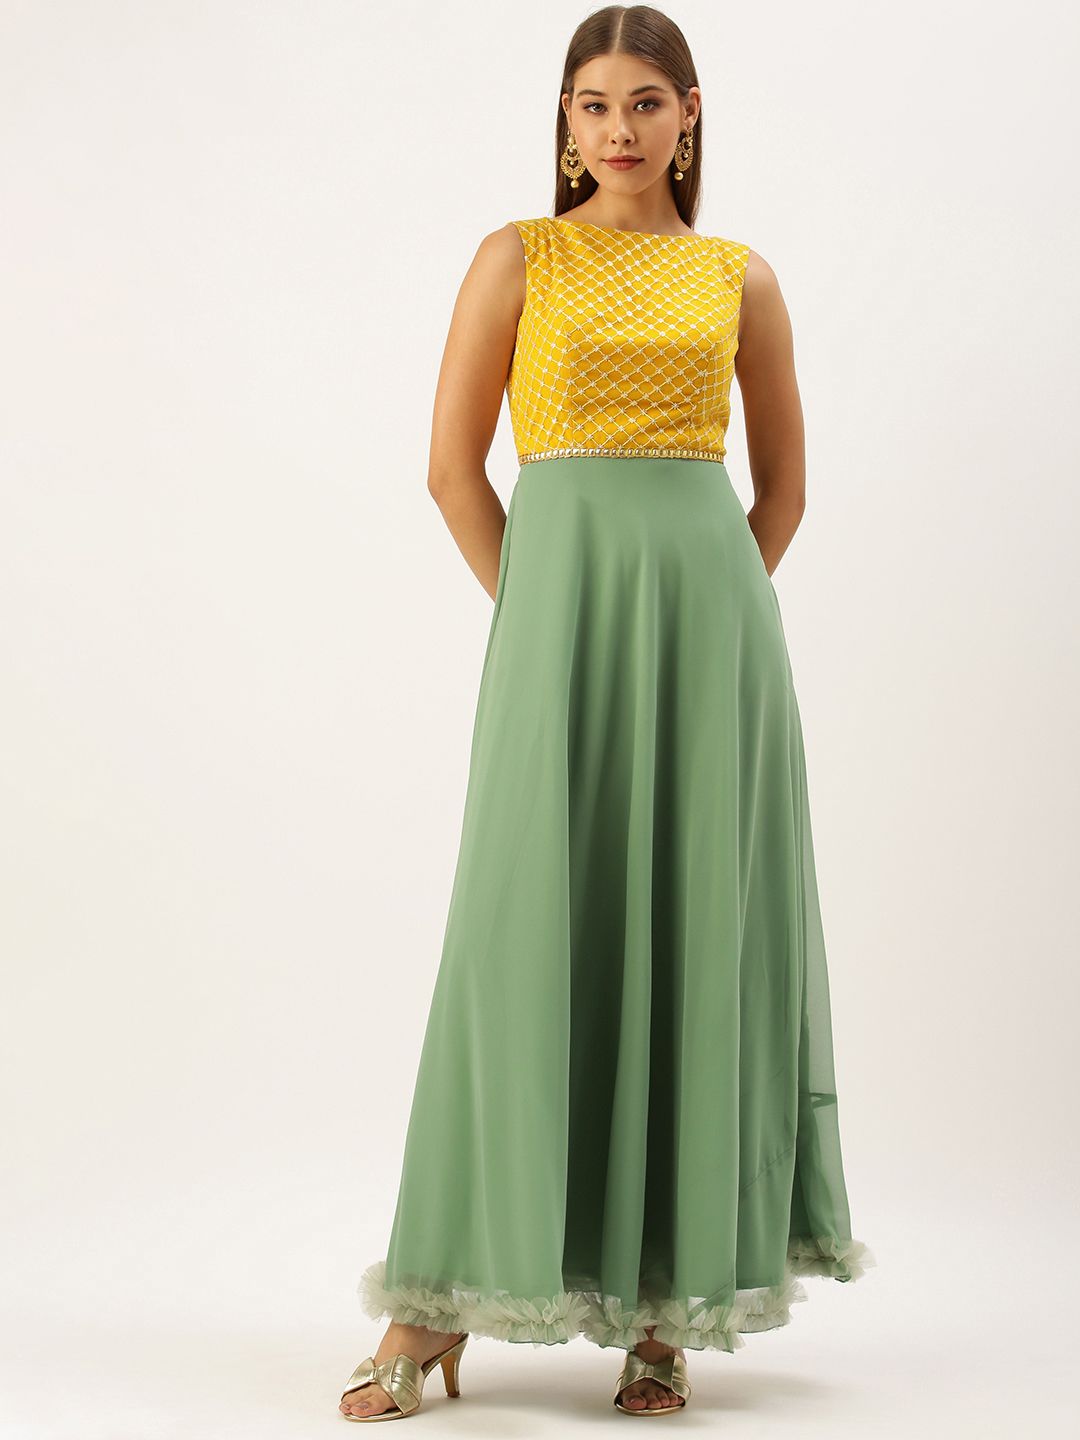 EthnoVogue Women Green & Mustard Yellow Embroidered Ethnic Maxi Dress Price in India